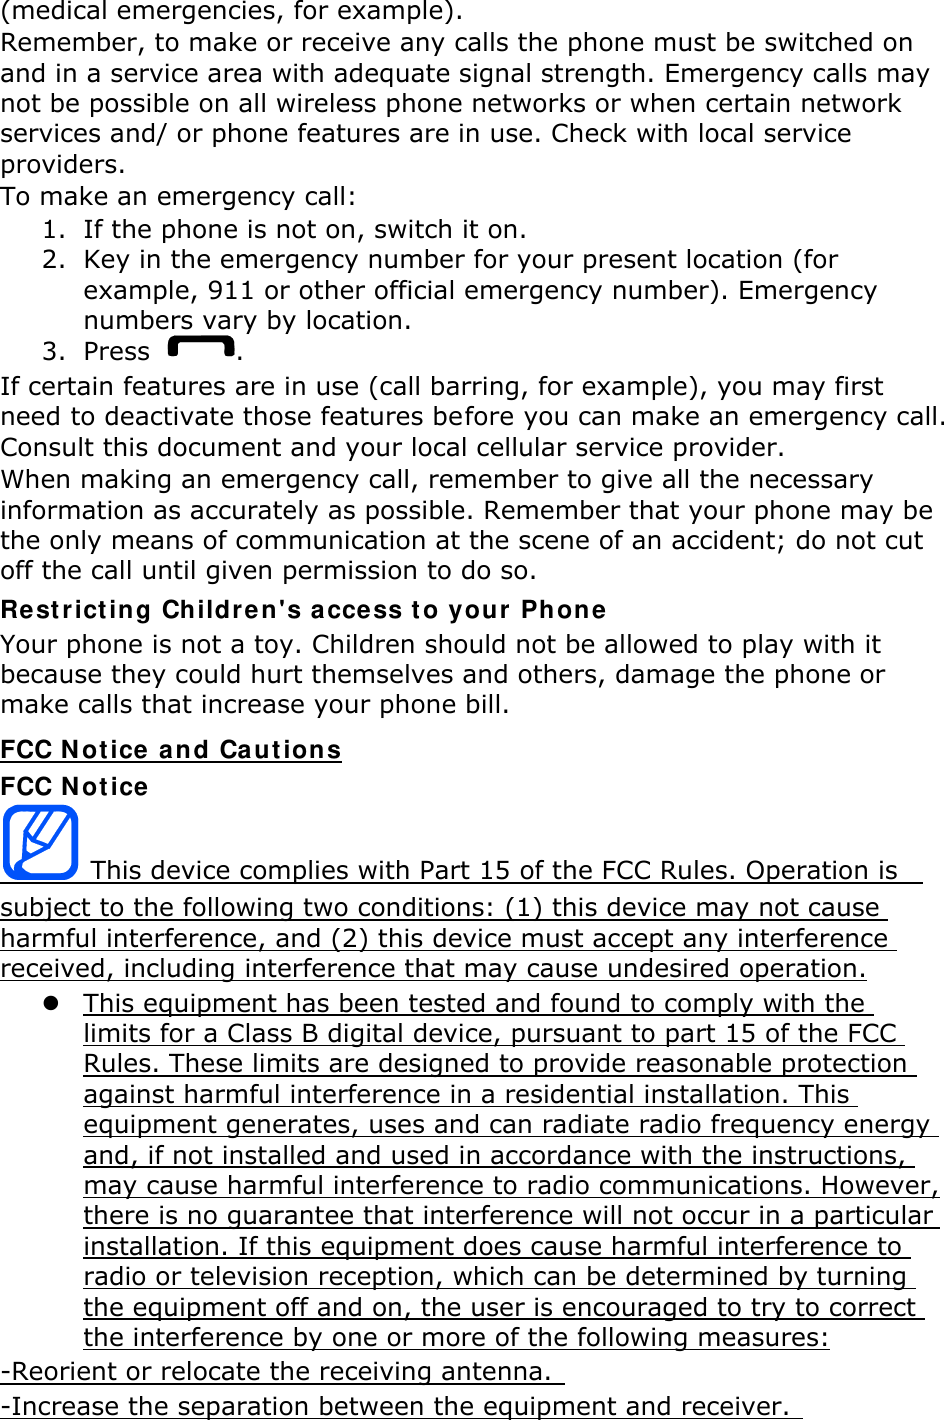 (medical emergencies, for example). Remember, to make or receive any calls the phone must be switched on and in a service area with adequate signal strength. Emergency calls may not be possible on all wireless phone networks or when certain network services and/ or phone features are in use. Check with local service providers. To make an emergency call: 1. If the phone is not on, switch it on. 2. Key in the emergency number for your present location (for example, 911 or other official emergency number). Emergency numbers vary by location. 3. Press  . If certain features are in use (call barring, for example), you may first need to deactivate those features before you can make an emergency call. Consult this document and your local cellular service provider. When making an emergency call, remember to give all the necessary information as accurately as possible. Remember that your phone may be the only means of communication at the scene of an accident; do not cut off the call until given permission to do so. Restricting Childre n&apos;s access t o your Phone  Your phone is not a toy. Children should not be allowed to play with it because they could hurt themselves and others, damage the phone or make calls that increase your phone bill. FCC N ot ice  and Cautions FCC N ot ice  This device complies with Part 15 of the FCC Rules. Operation is   subject to the following two conditions: (1) this device may not cause harmful interference, and (2) this device must accept any interference received, including interference that may cause undesired operation. z This equipment has been tested and found to comply with the limits for a Class B digital device, pursuant to part 15 of the FCC Rules. These limits are designed to provide reasonable protection against harmful interference in a residential installation. This equipment generates, uses and can radiate radio frequency energy and, if not installed and used in accordance with the instructions, may cause harmful interference to radio communications. However, there is no guarantee that interference will not occur in a particular installation. If this equipment does cause harmful interference to radio or television reception, which can be determined by turning the equipment off and on, the user is encouraged to try to correct the interference by one or more of the following measures: -Reorient or relocate the receiving antenna.   -Increase the separation between the equipment and receiver.  